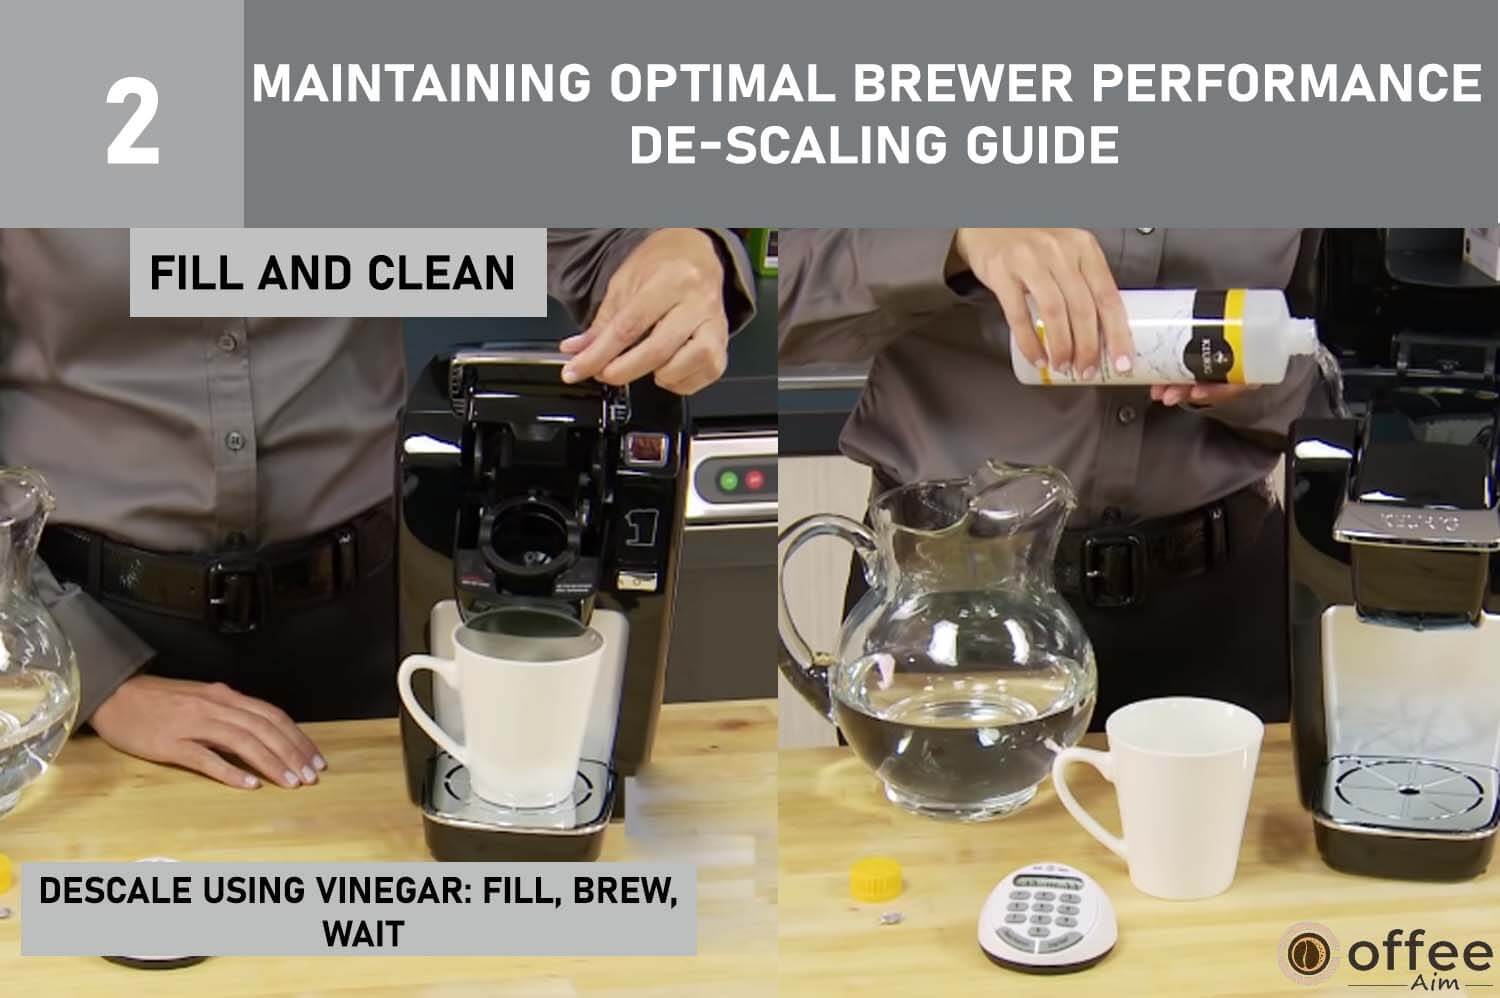 This image illustrates the "FILL AND CLEAN" process outlined in the "Maintaining Optimal Brewer Performance: De-scaling Guide" section of the article "How To Use Keurig B-31."